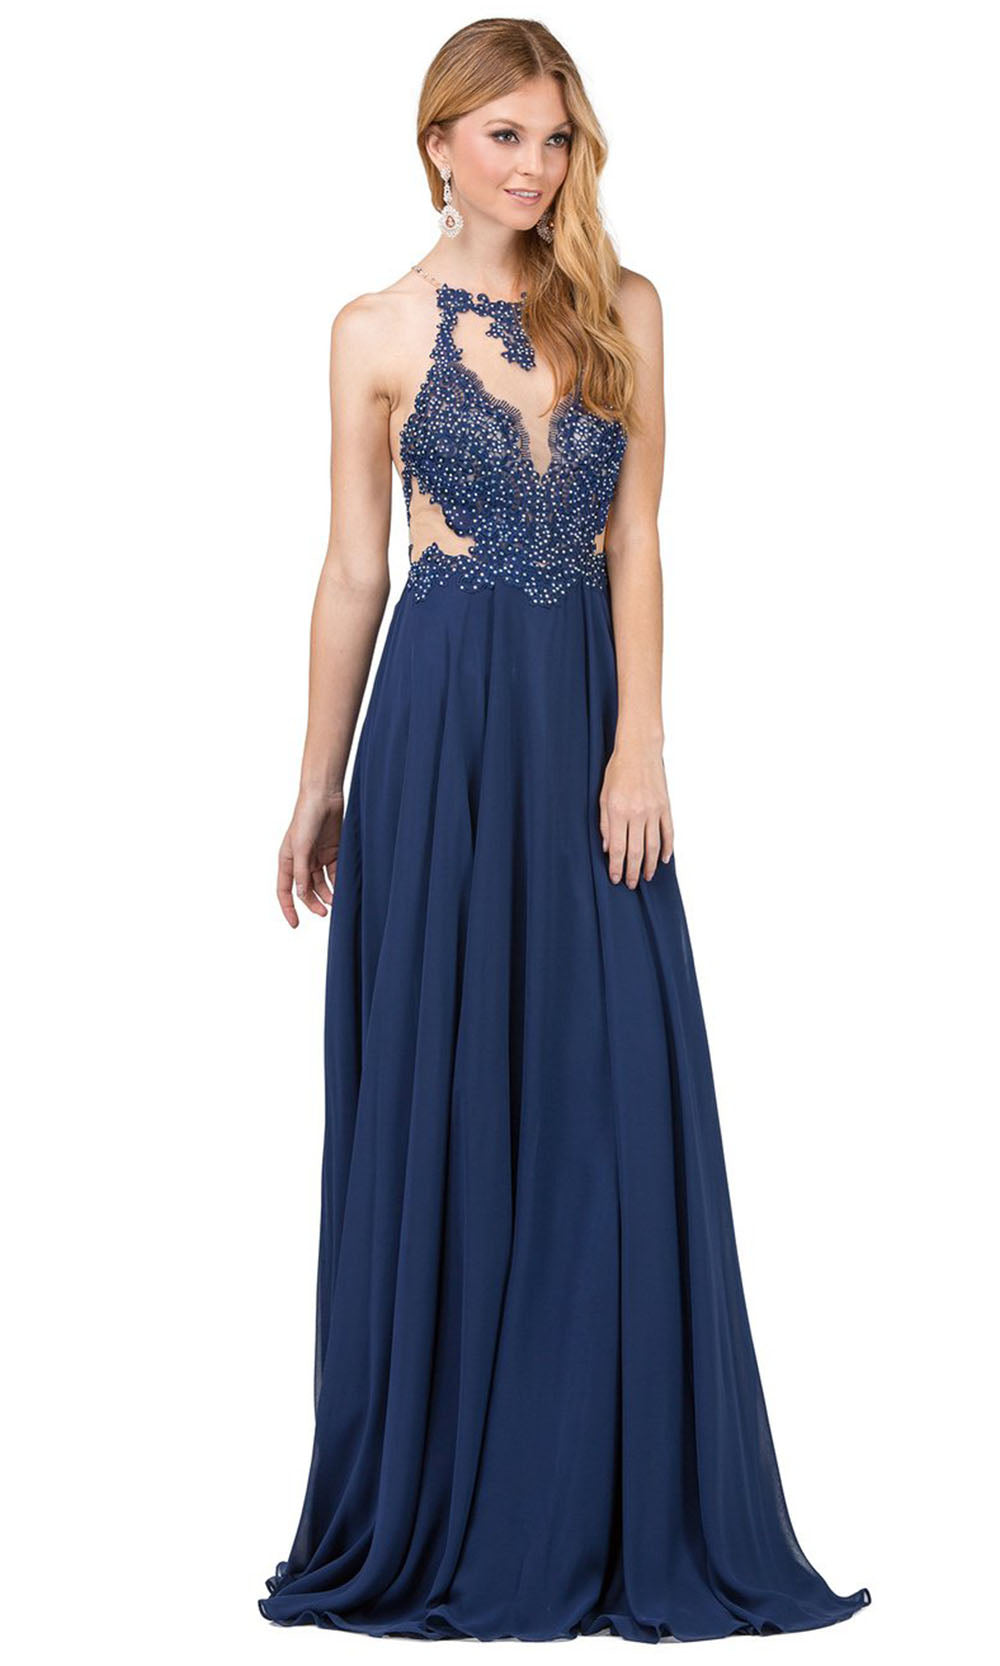 Dancing Queen - 2015 Embroidered Halter Neck A-Line Dress In Blue